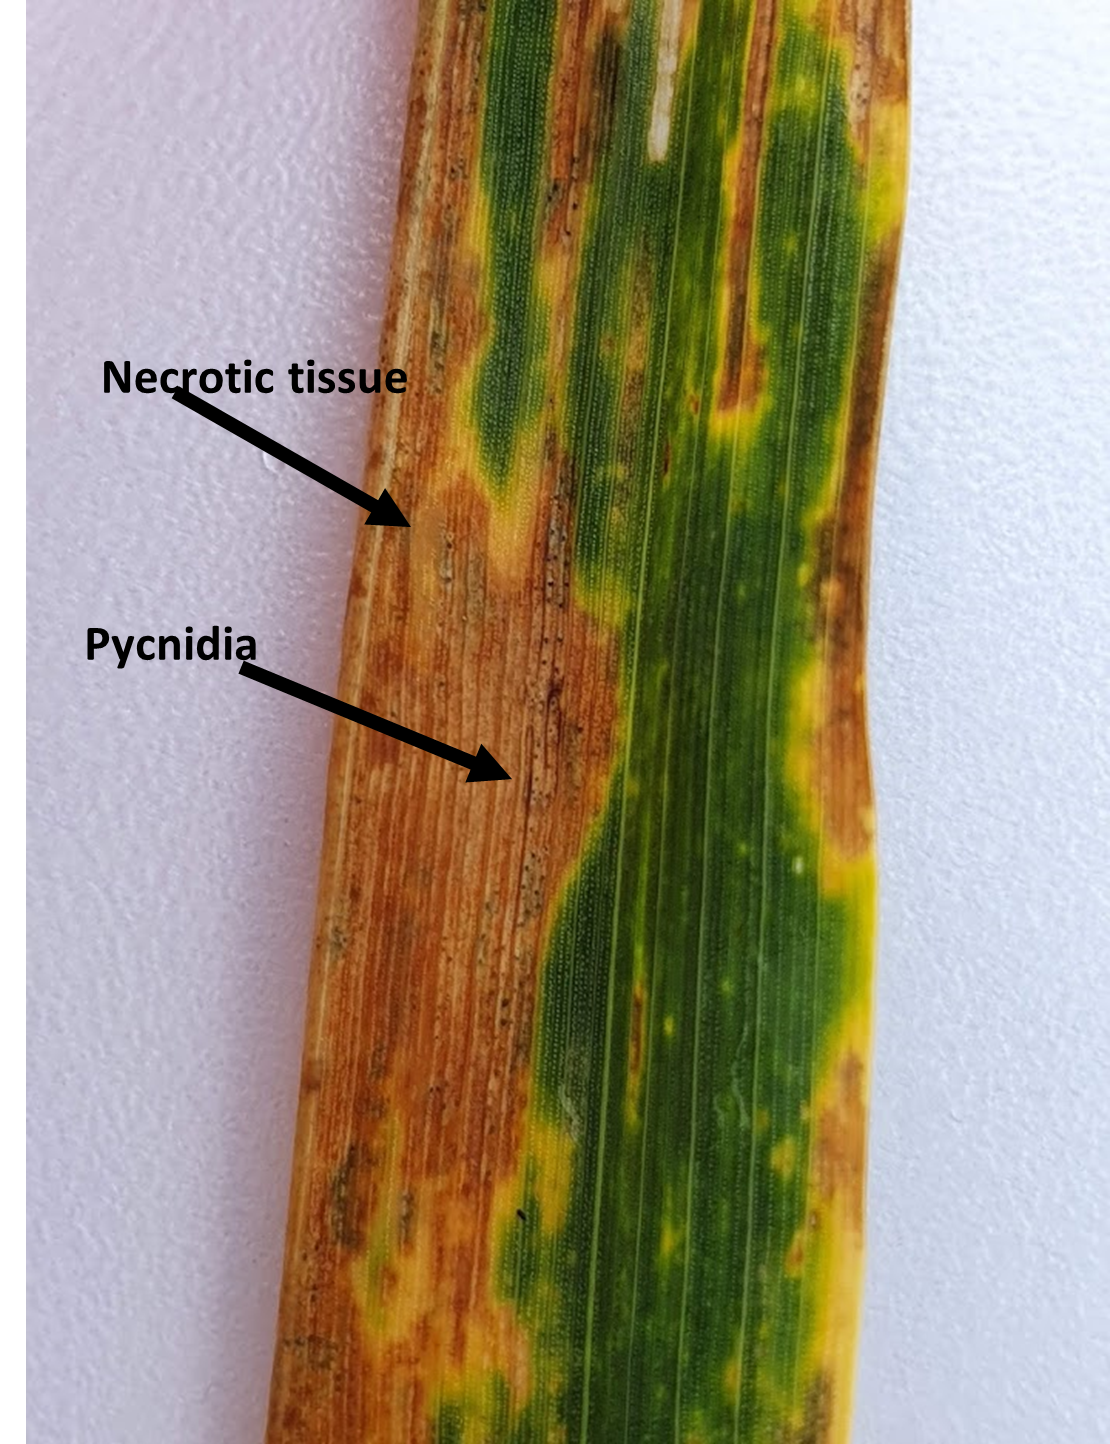 Wheat leaf infected by septoria